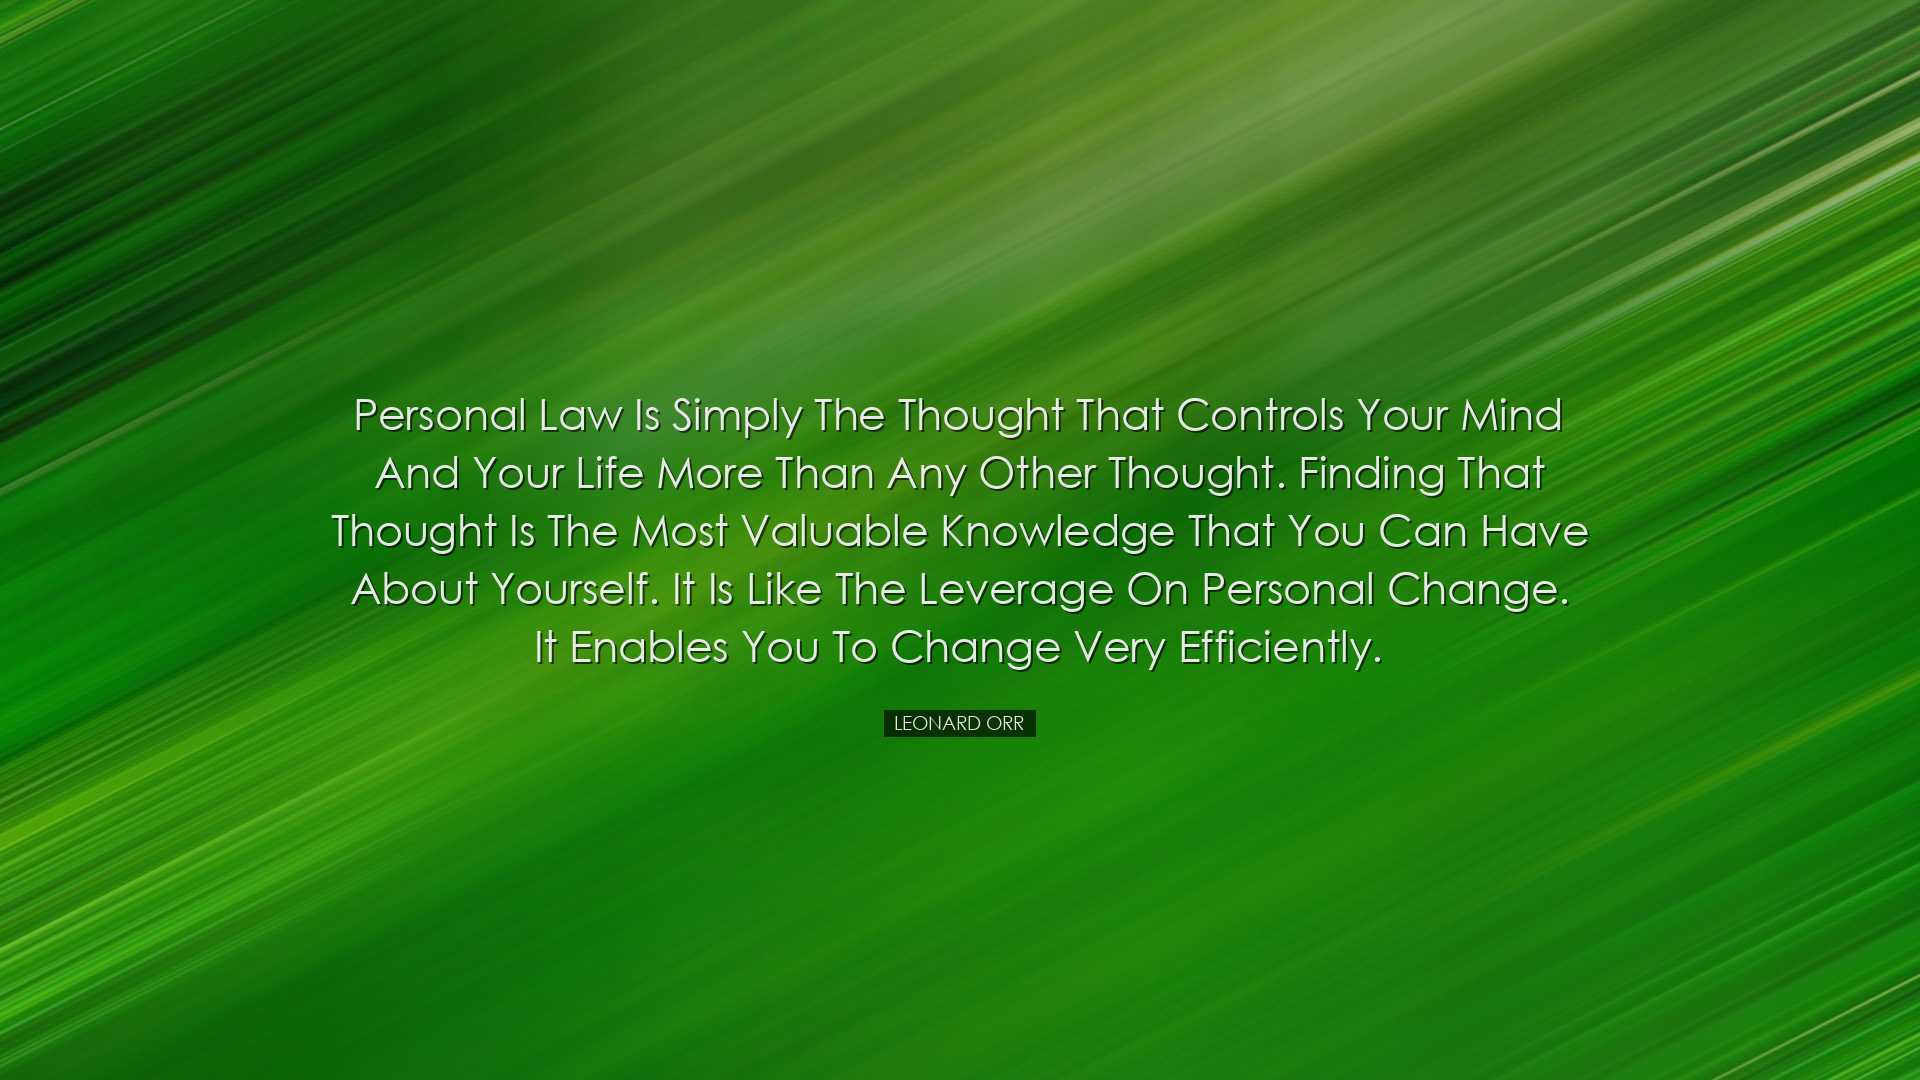 Personal law is simply the thought that controls your mind and you